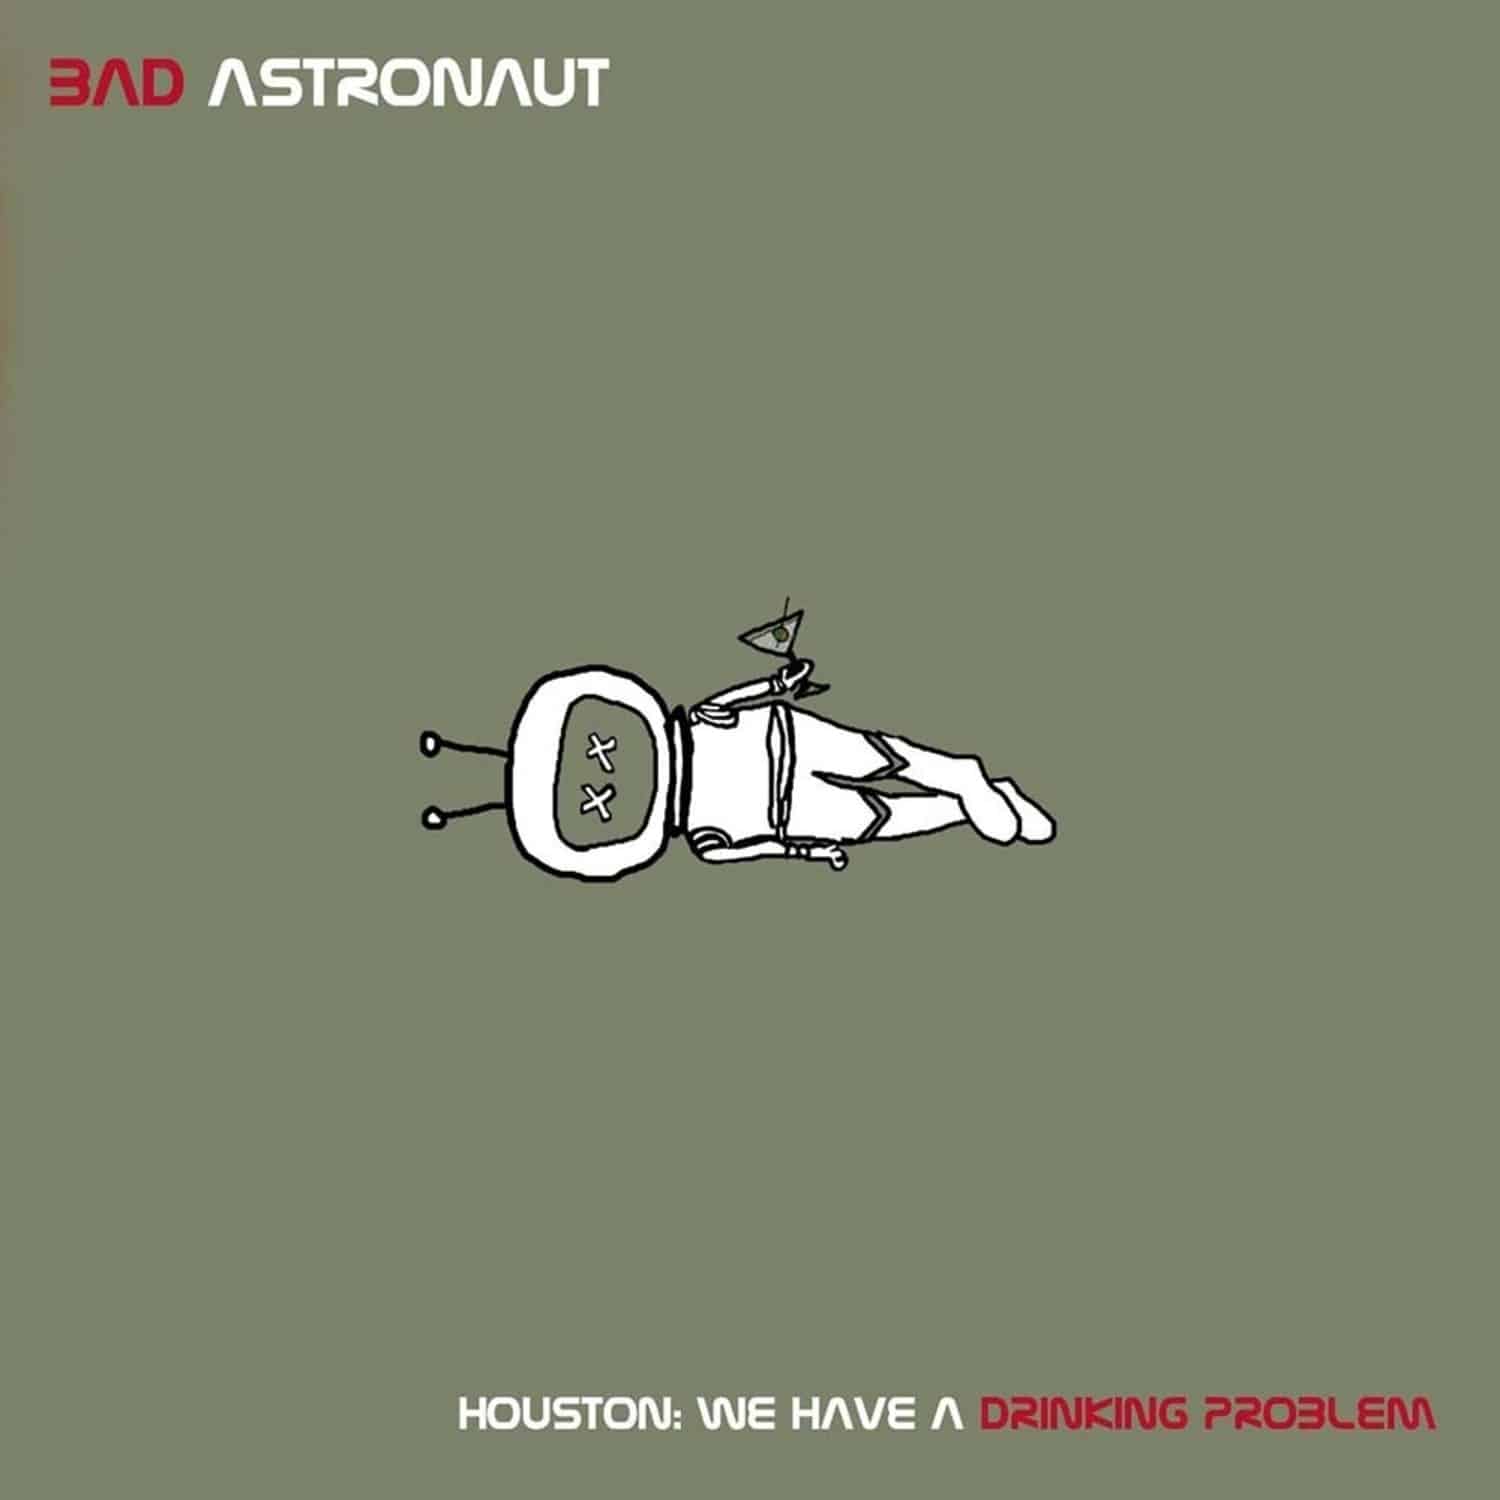 Bad Astronaut - HOUSTON:WE HAVE A DRINKING PROBLEM 